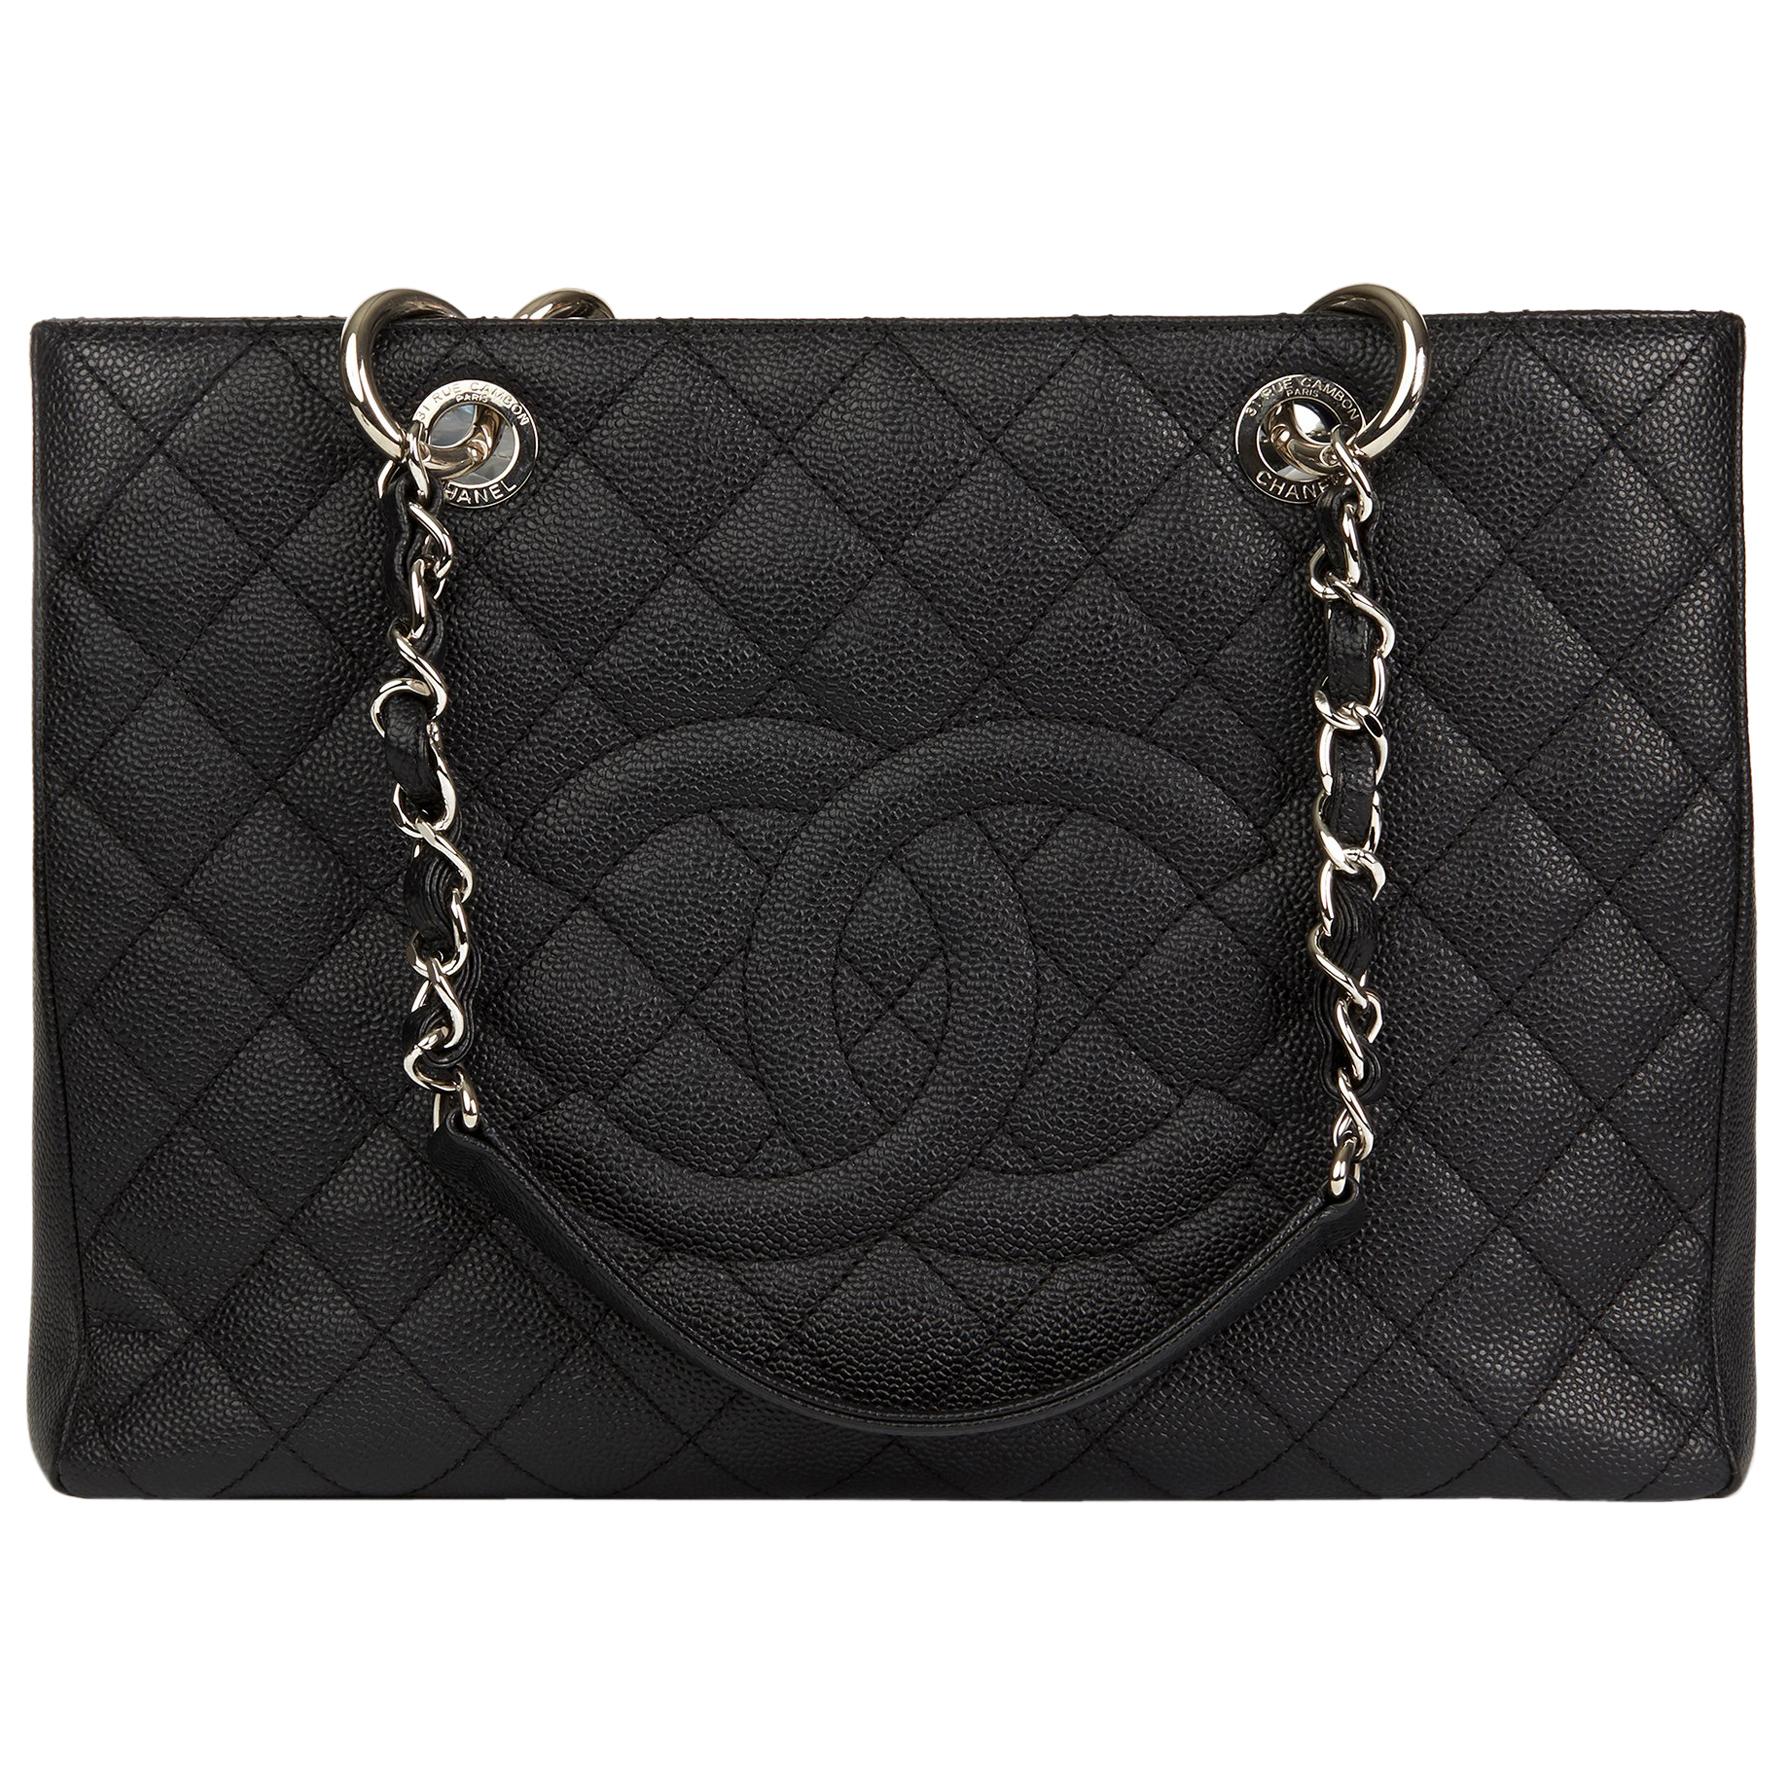 2014 Chanel Black Quilted Caviar Leather Grand Shopping Tote GST